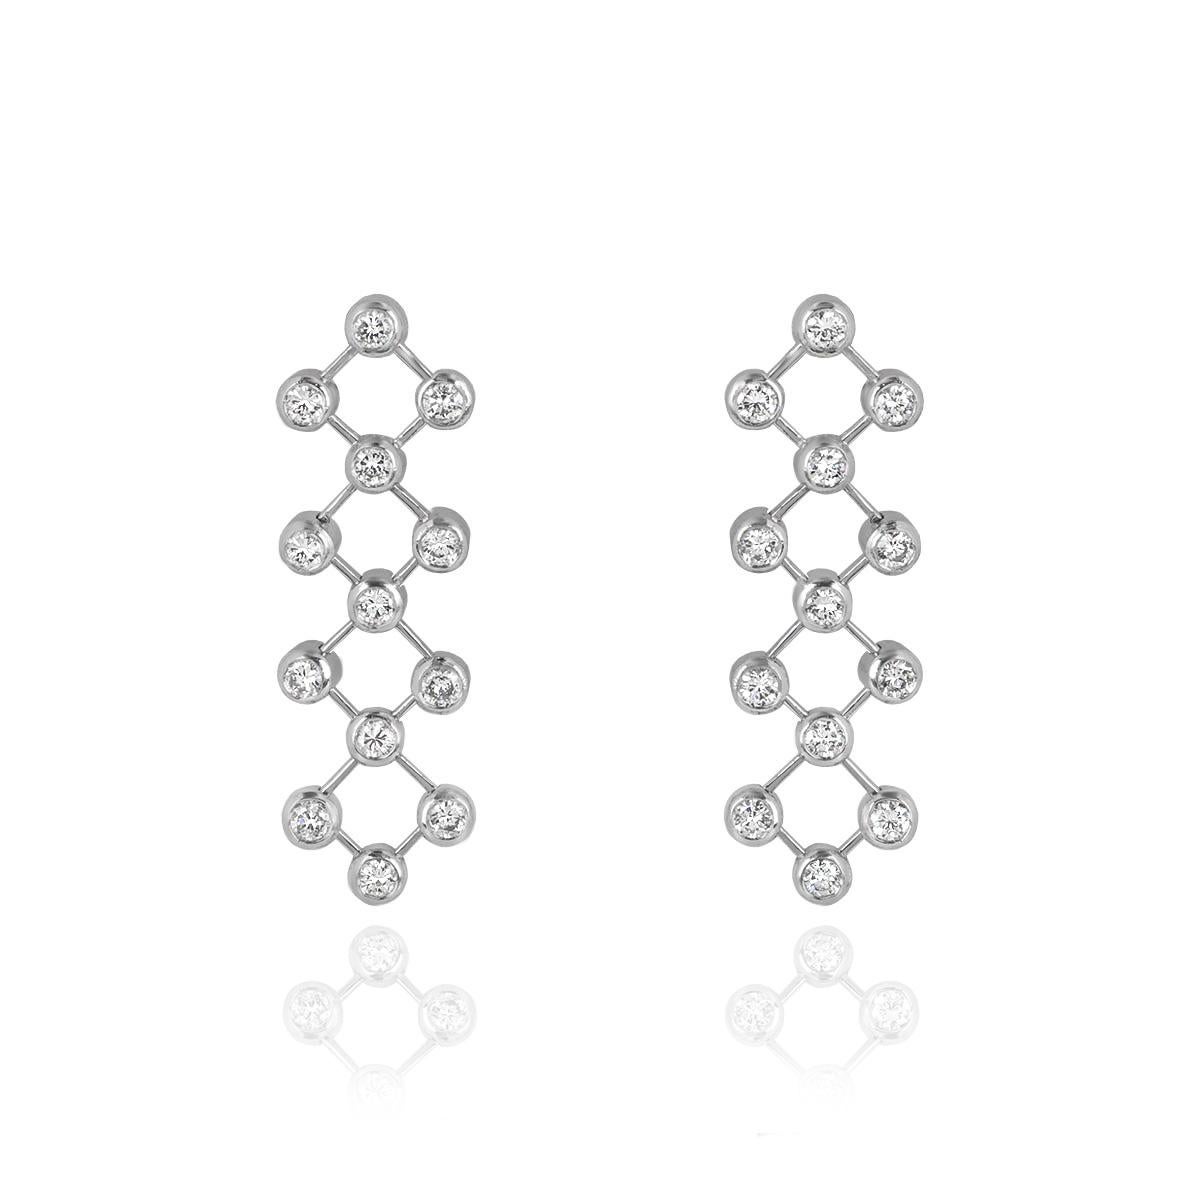 A stunning pair of platinum diamond drop earrings by Tiffany & Co. The earrings are set with round brilliant cut diamonds in a rubover setting joined together by moving flexi bars. The 26 diamonds have an approximate total weight of 1.04ct. The